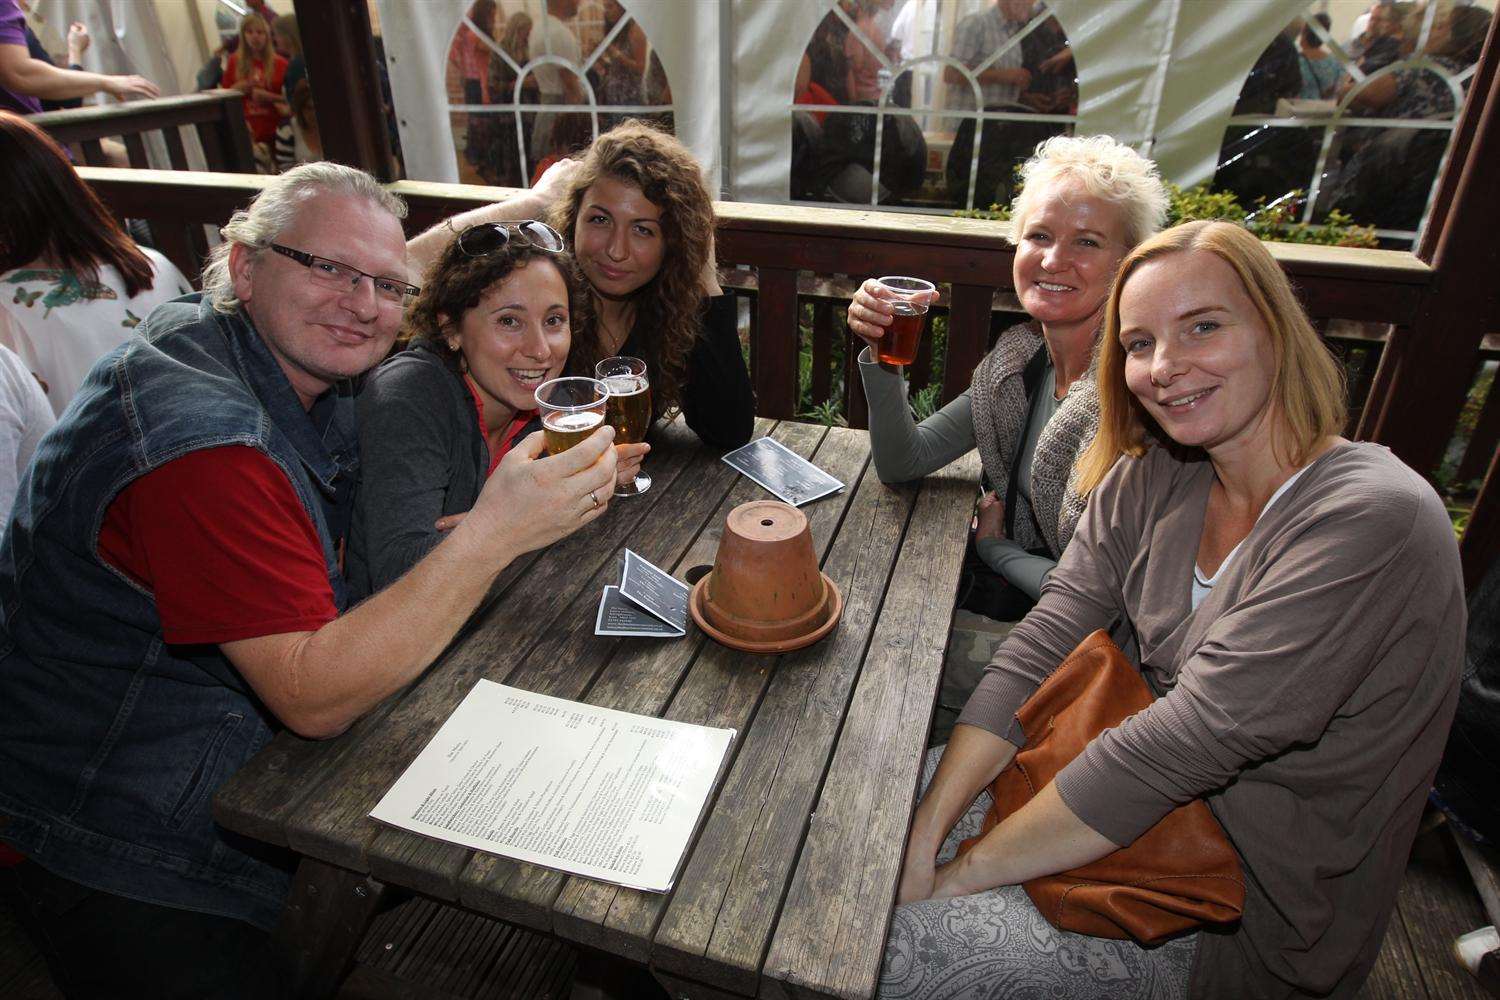 Friends at the Three Tuns at a Kentish Beer and Cider Festival at Lower Halstow.